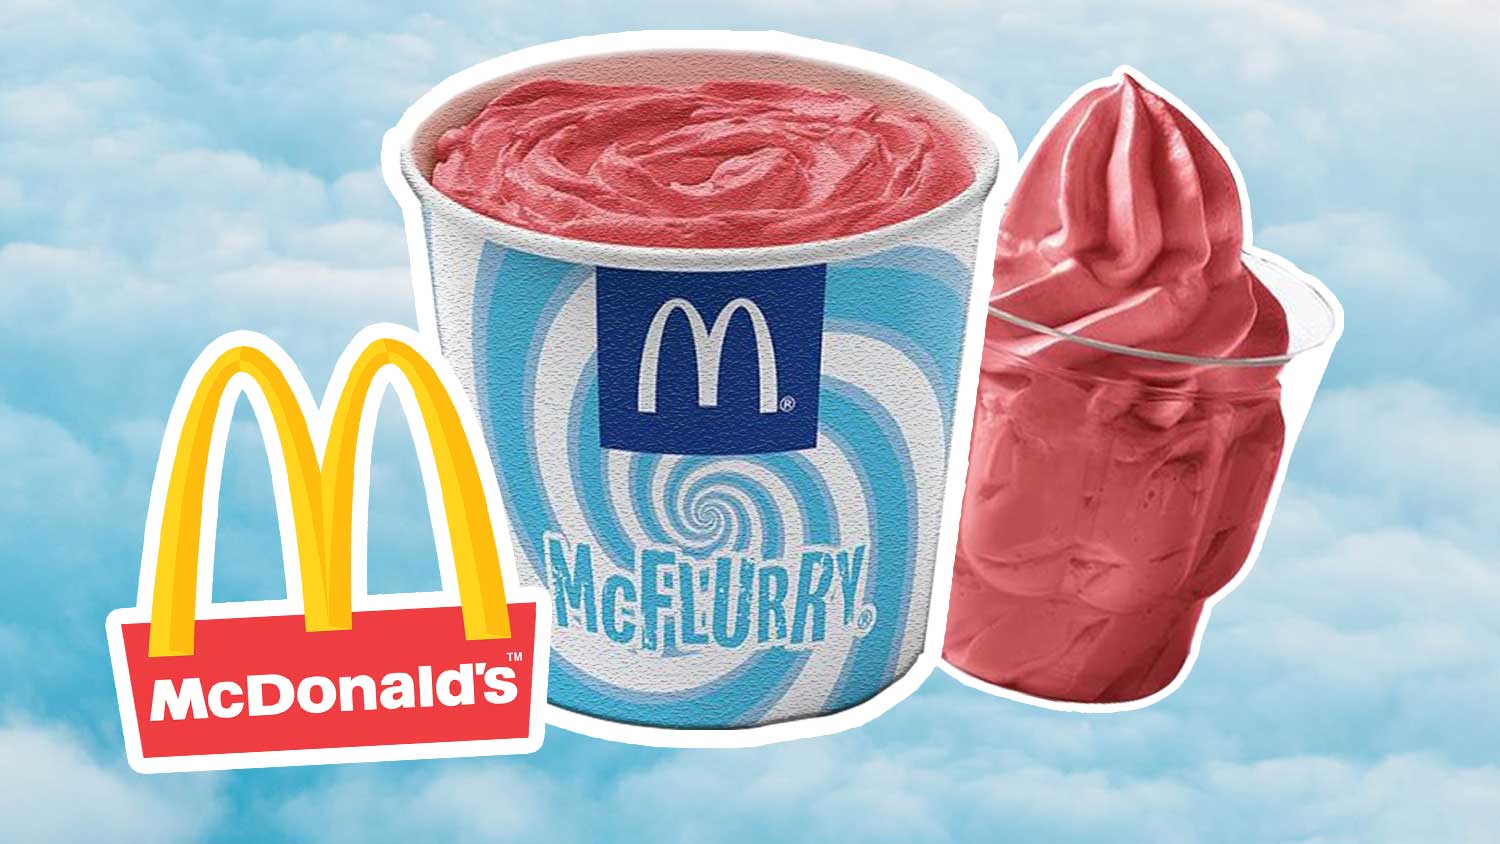 Mcdonald’s Just Launched a Vegan Strawberry Mcflurry